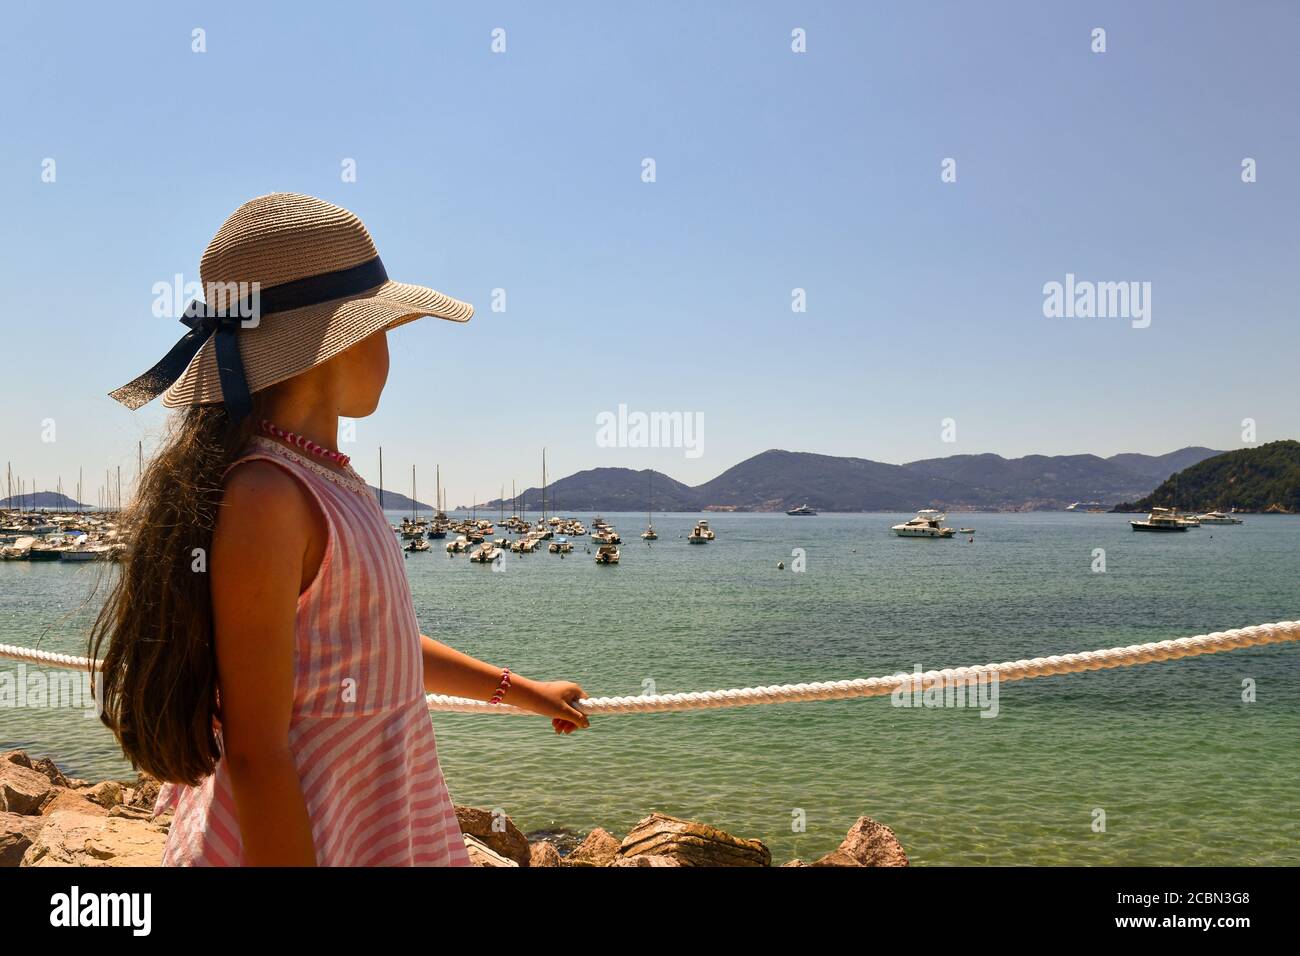 Portrait of a long haired little girl (9-10 y.o.) admiring the view of the Gulf of Poets with the promontory of Porto Venere, Lerici, La Spezia, Italy Stock Photo